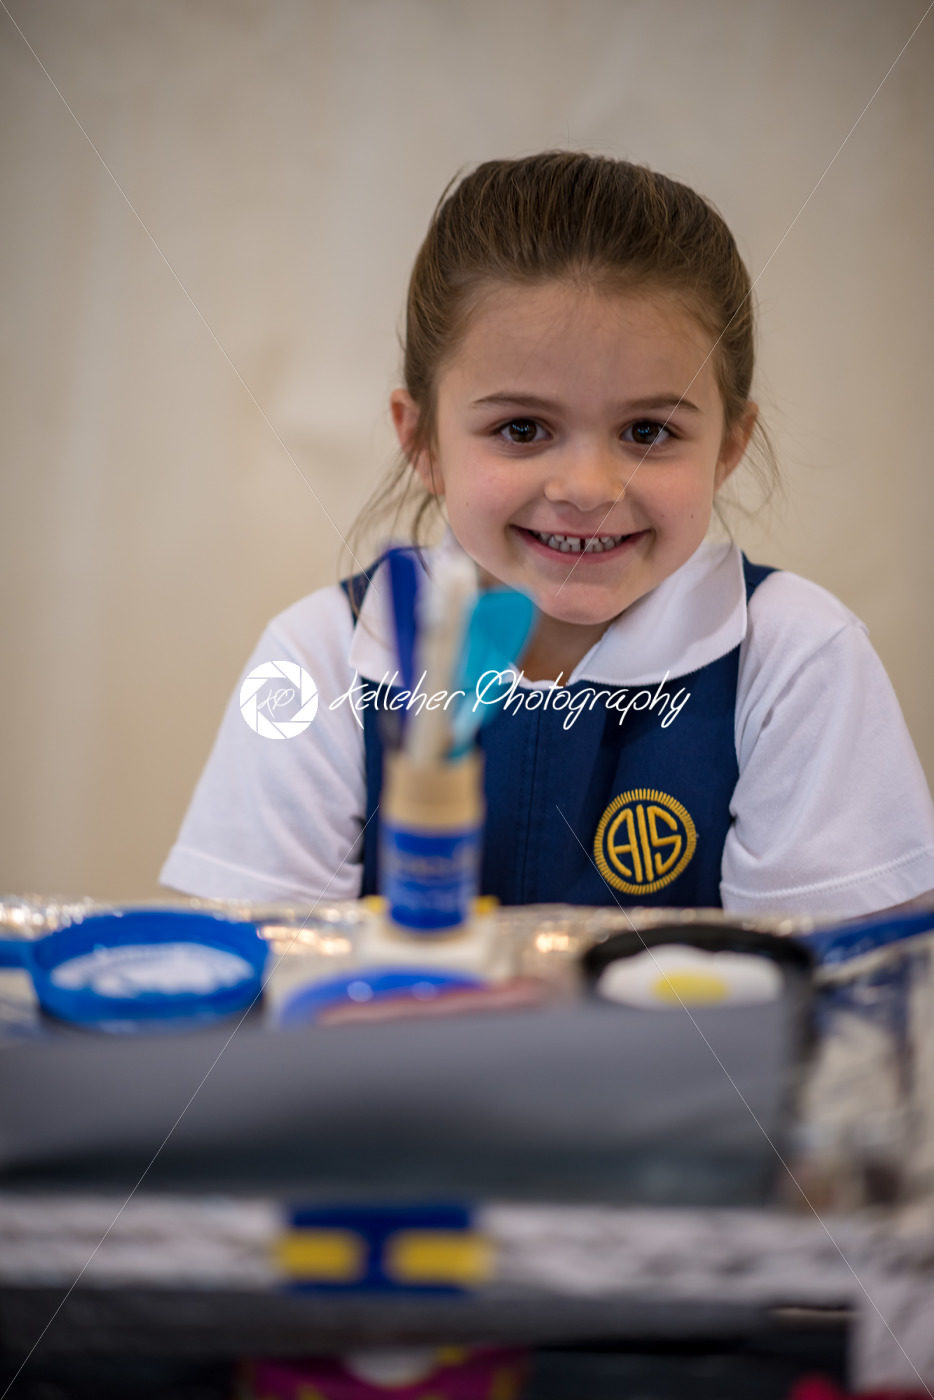 Rosemont, PA – March 20, 2018: The Agnes Irwin School Kindergarten Invention Convention - Kelleher Photography Store